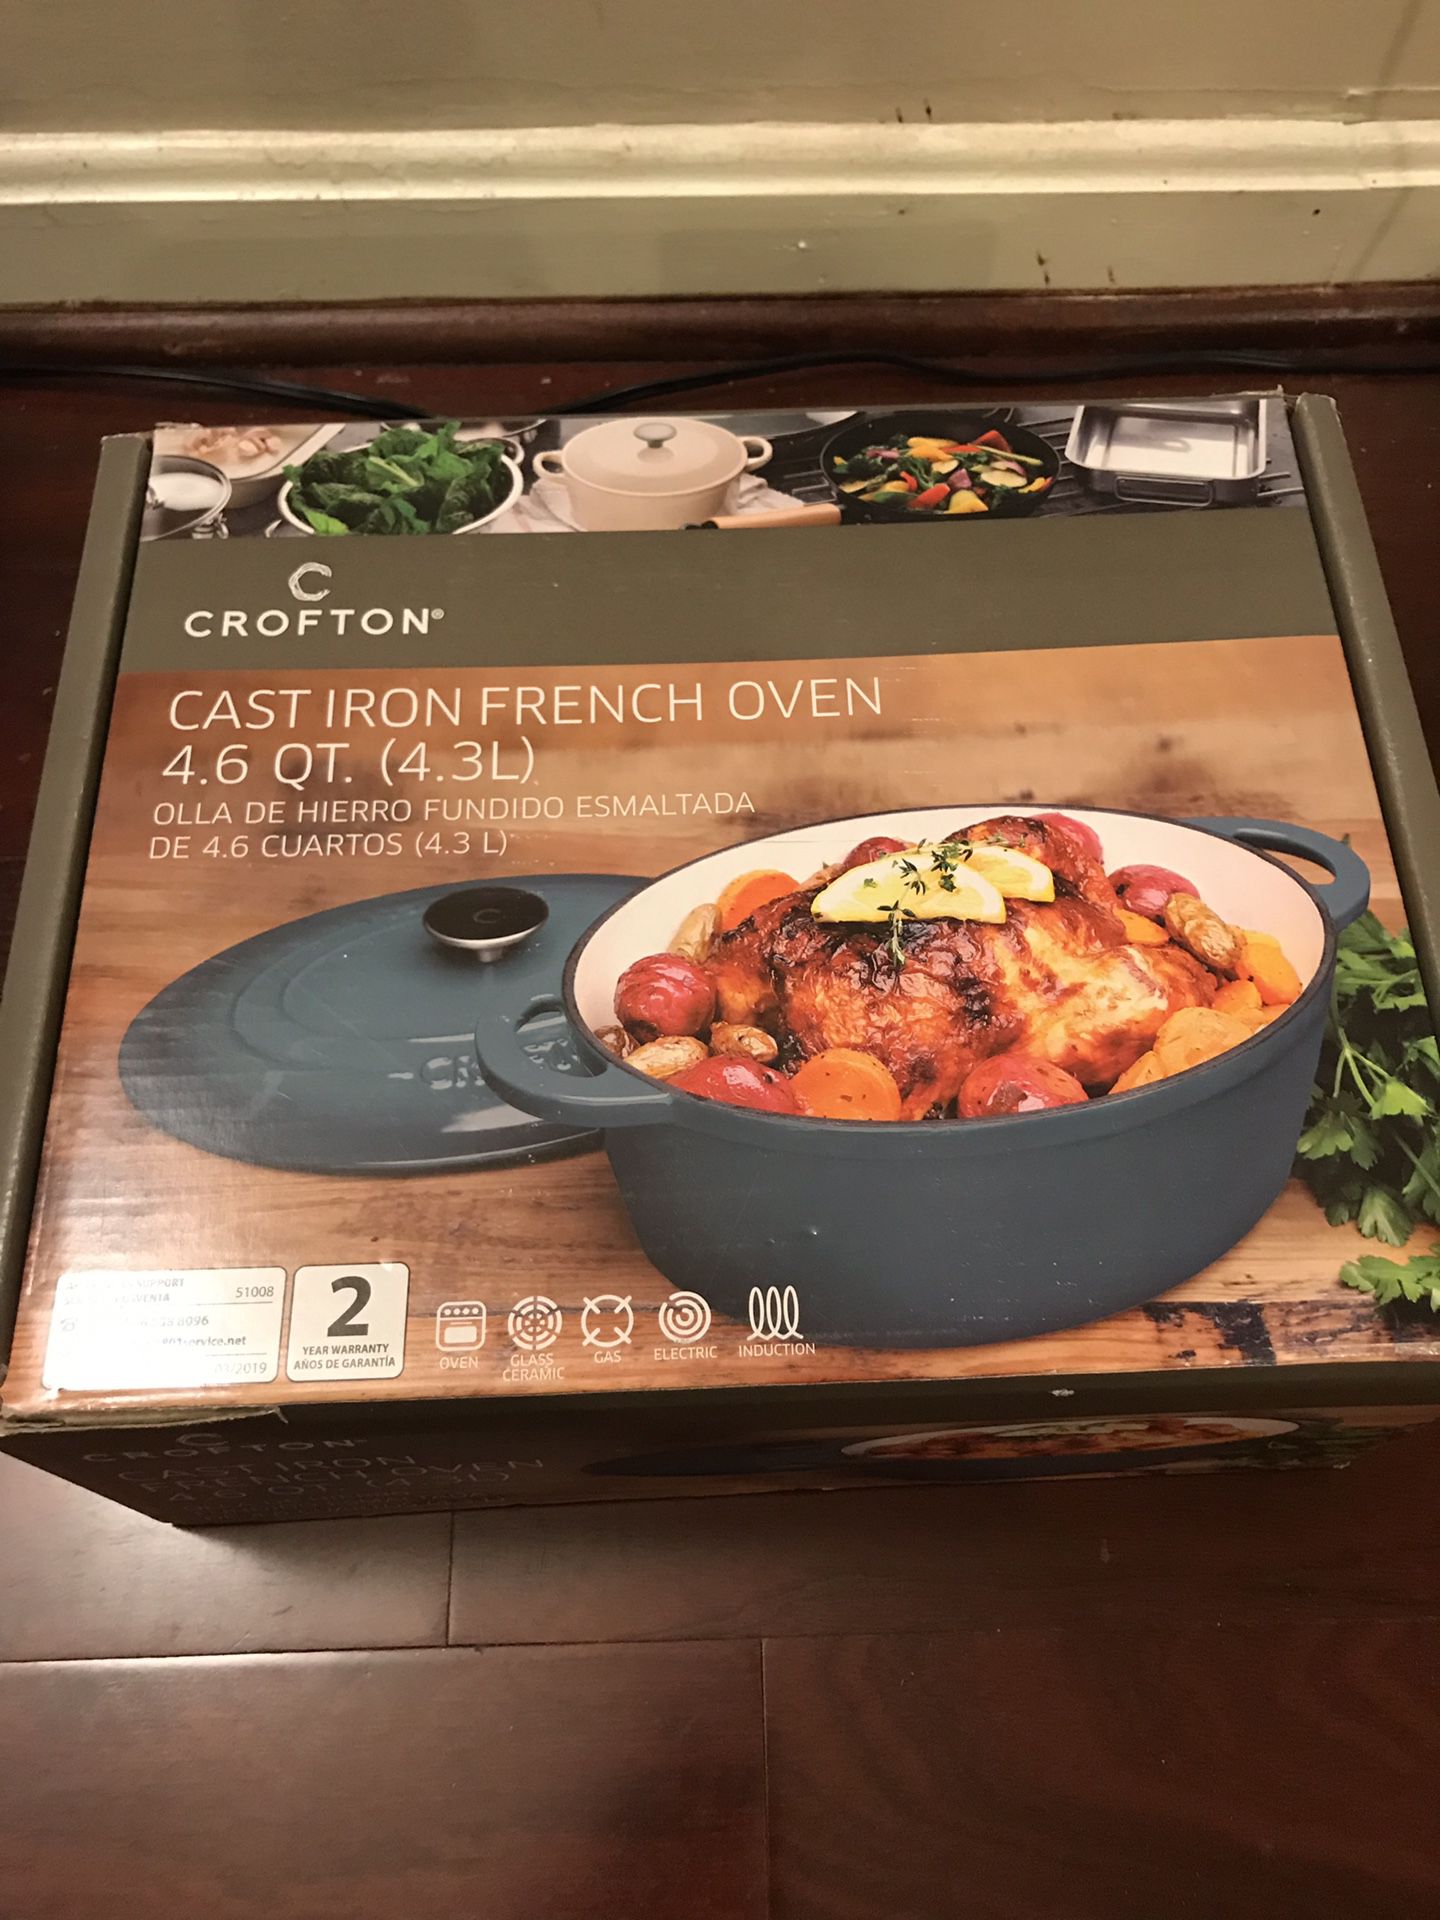 Cast iron French oven